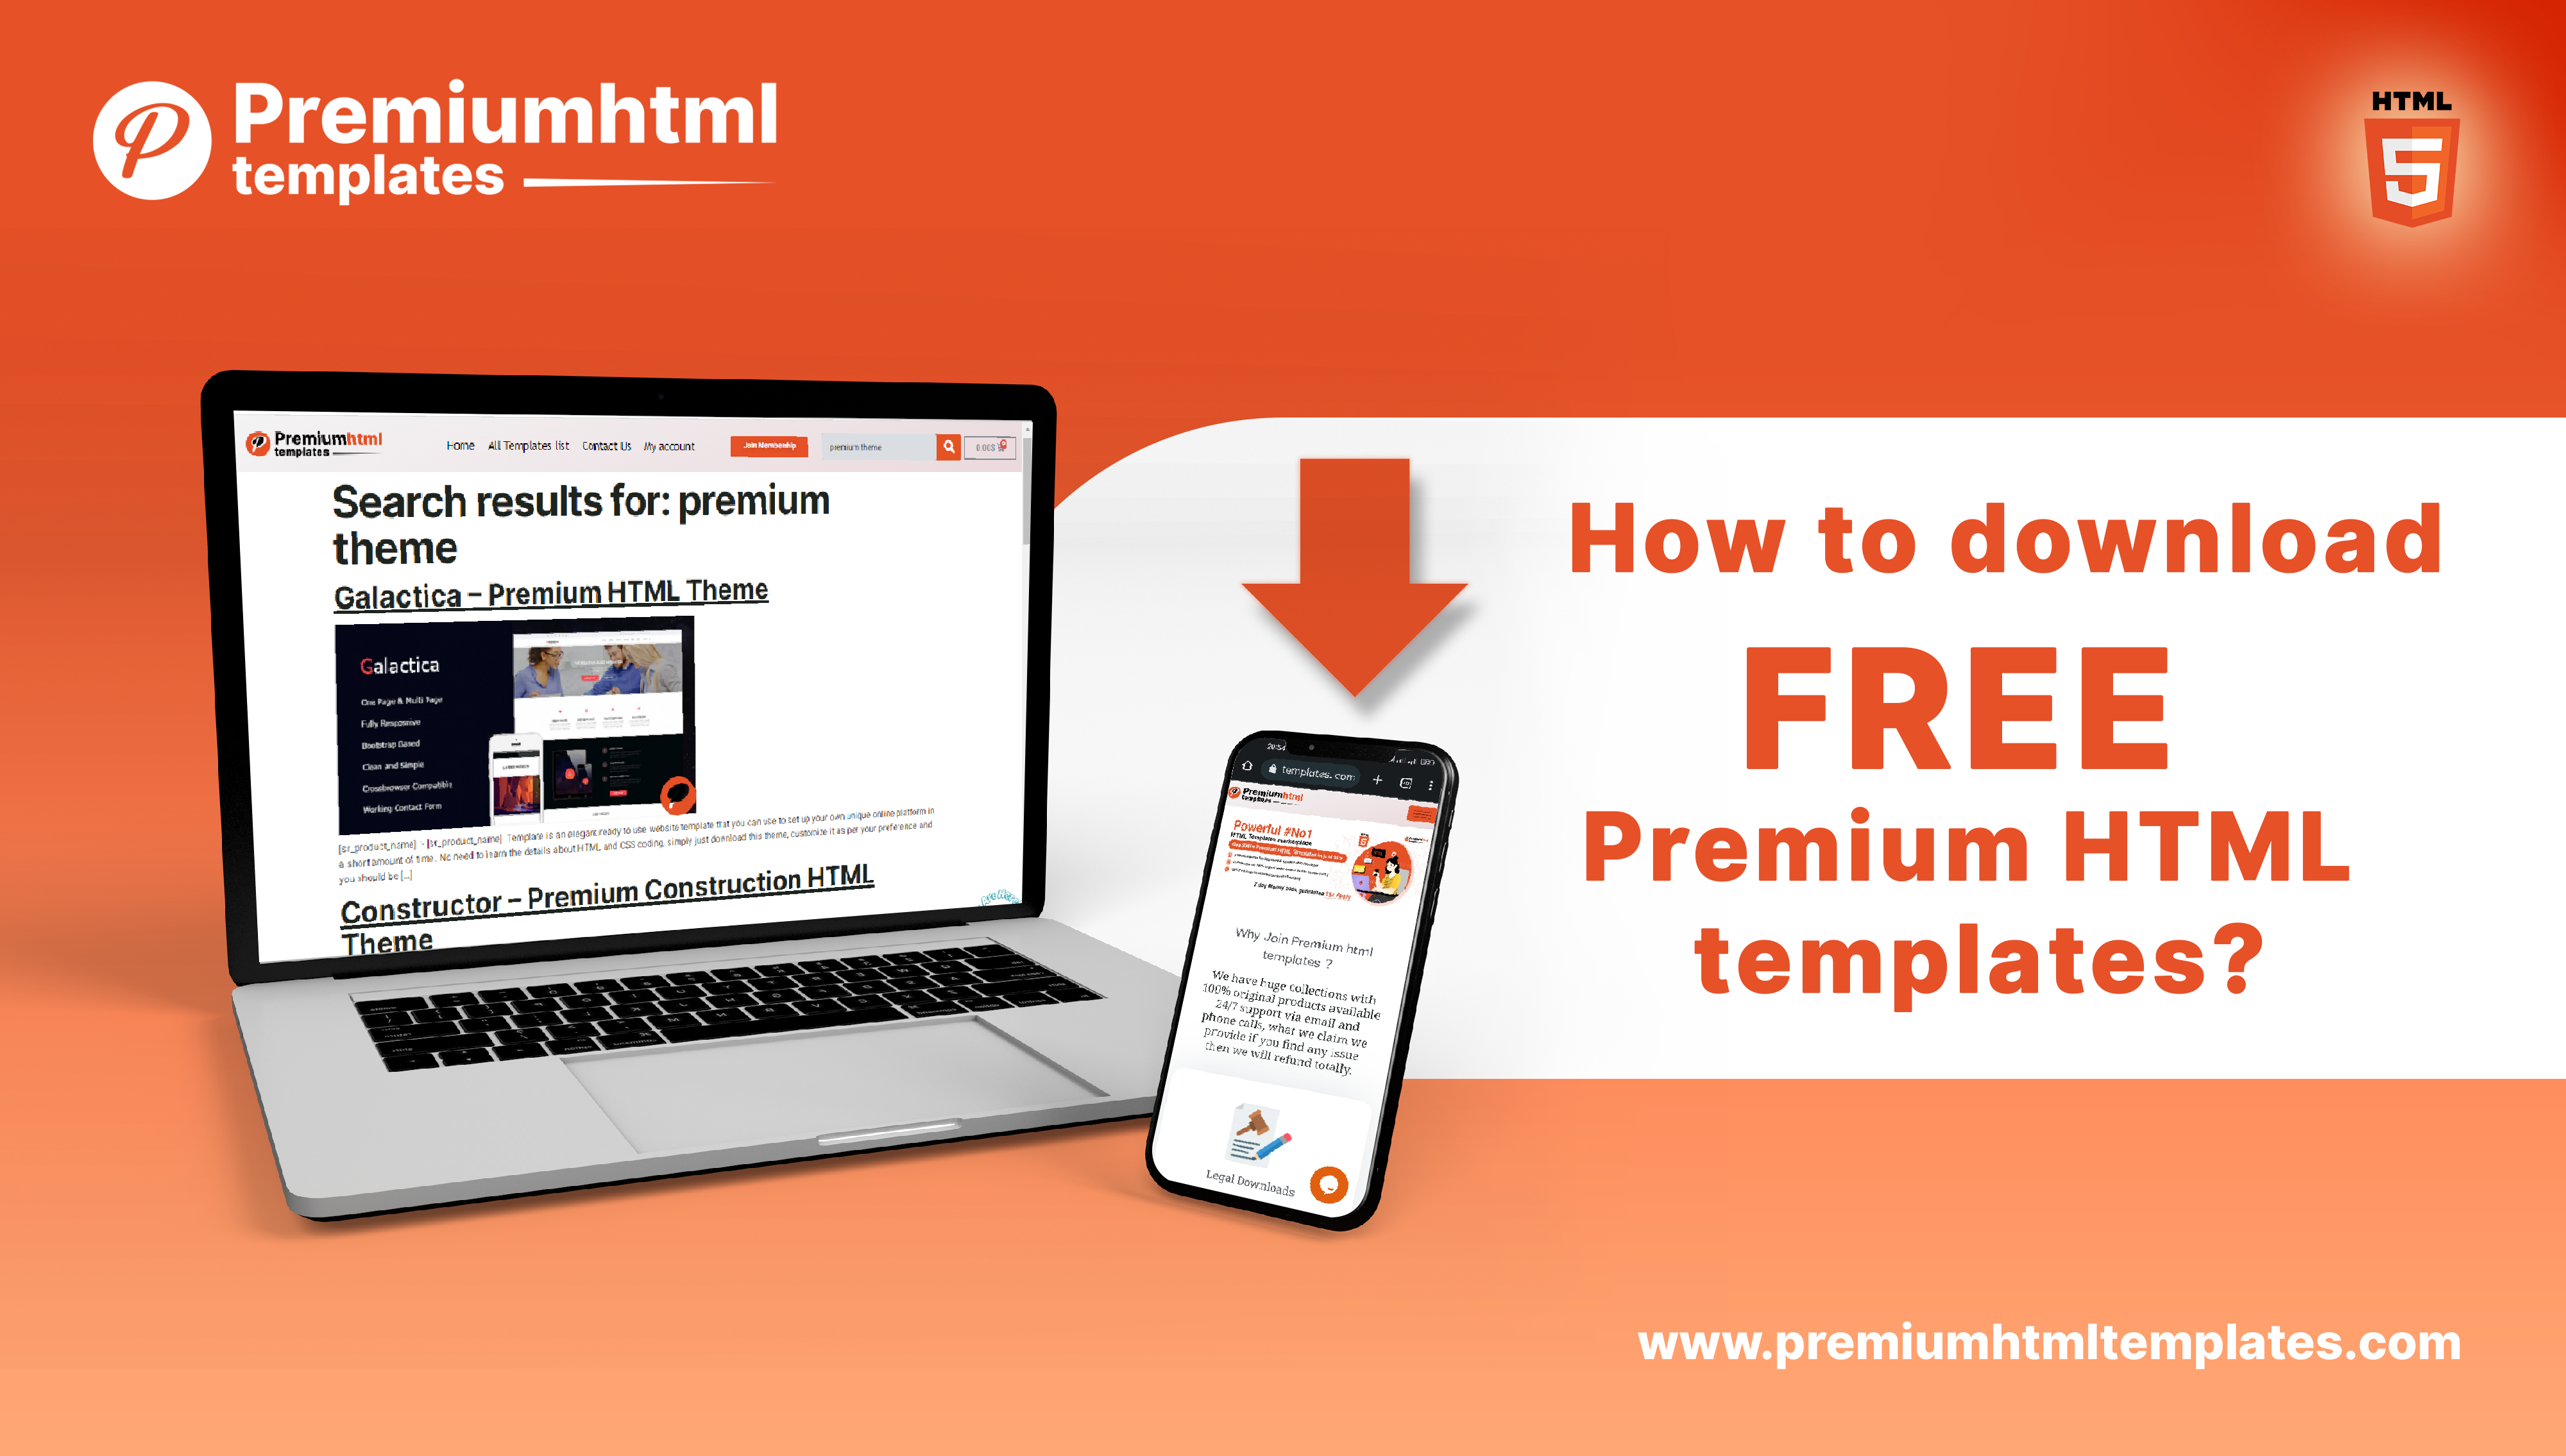 How to download free Premium HTML templates